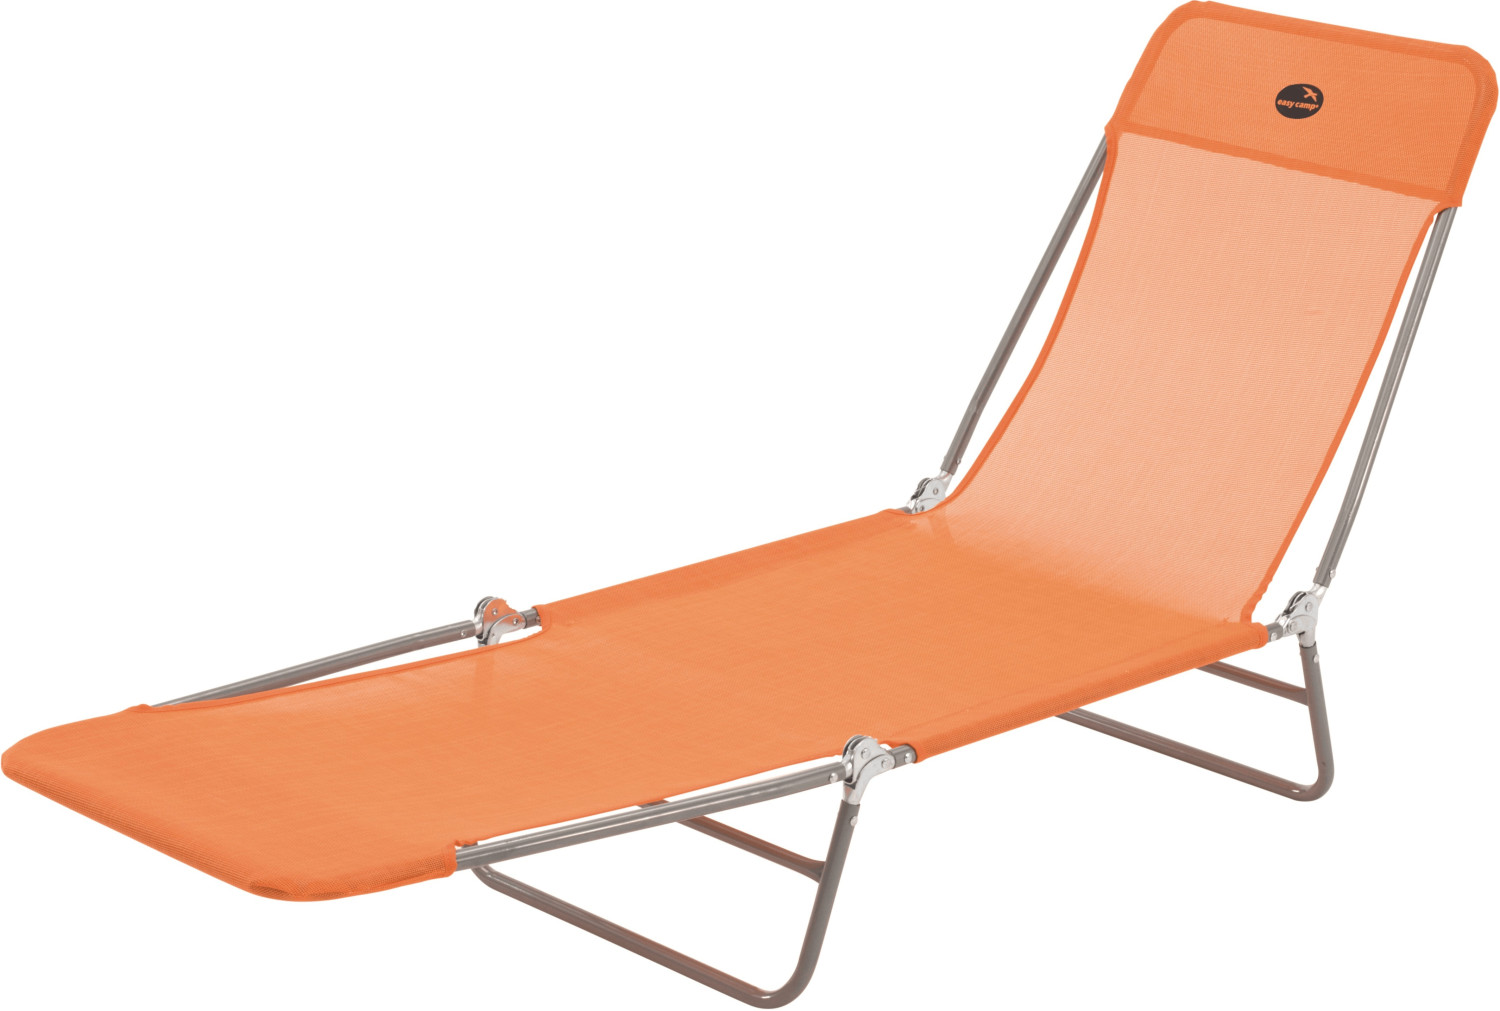 easy camp Cay Lounger orange